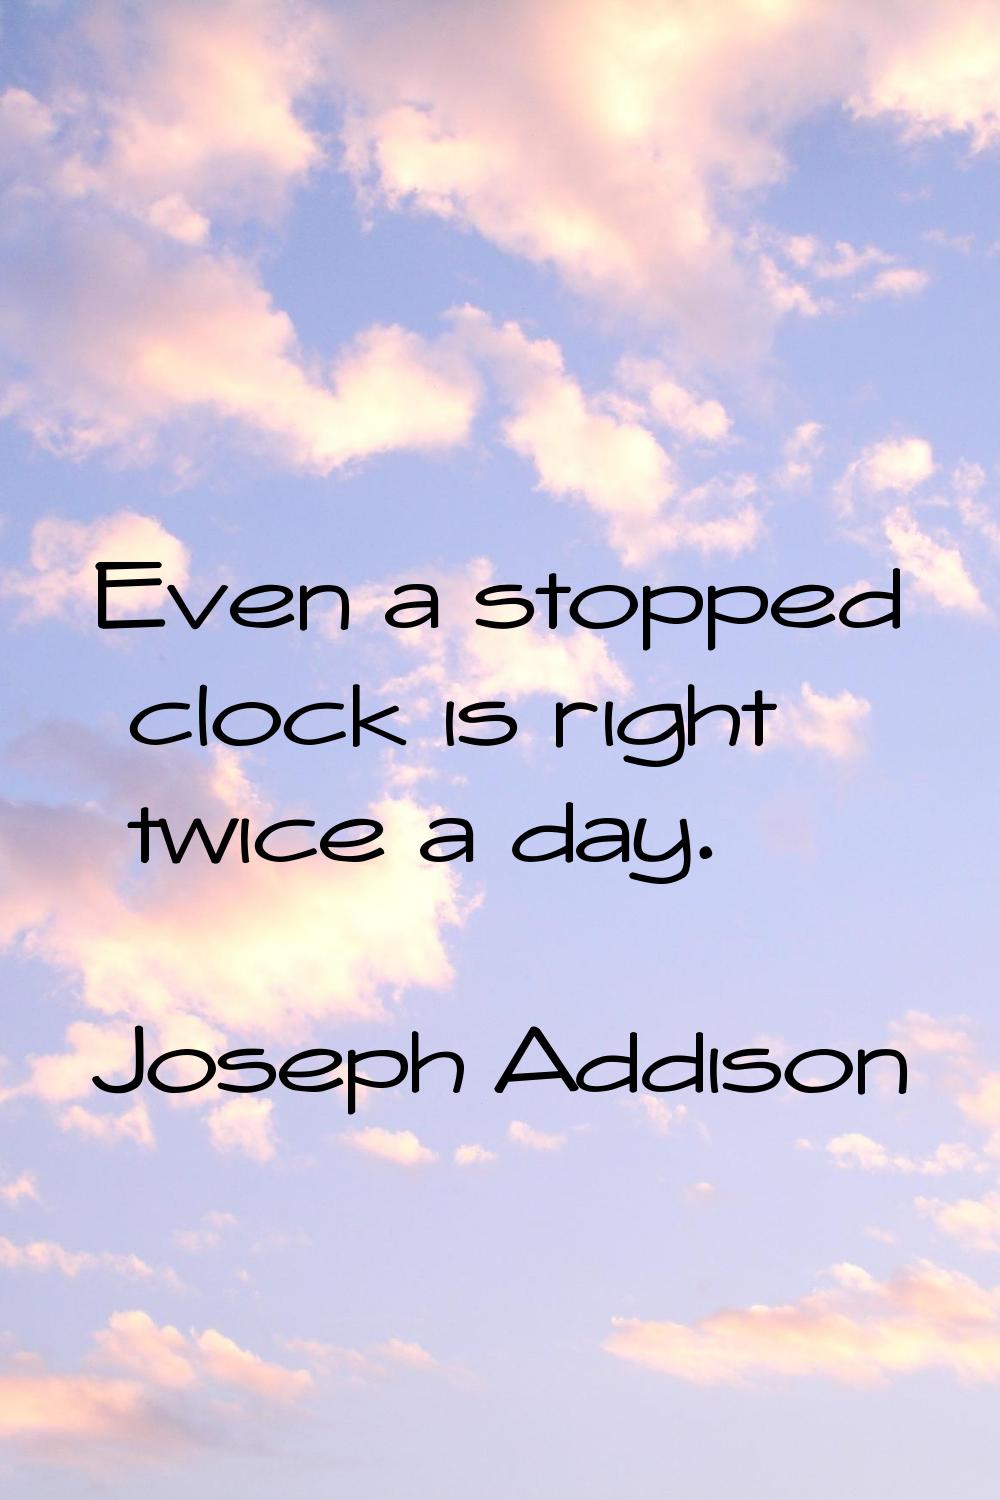 Even a stopped clock is right twice a day.